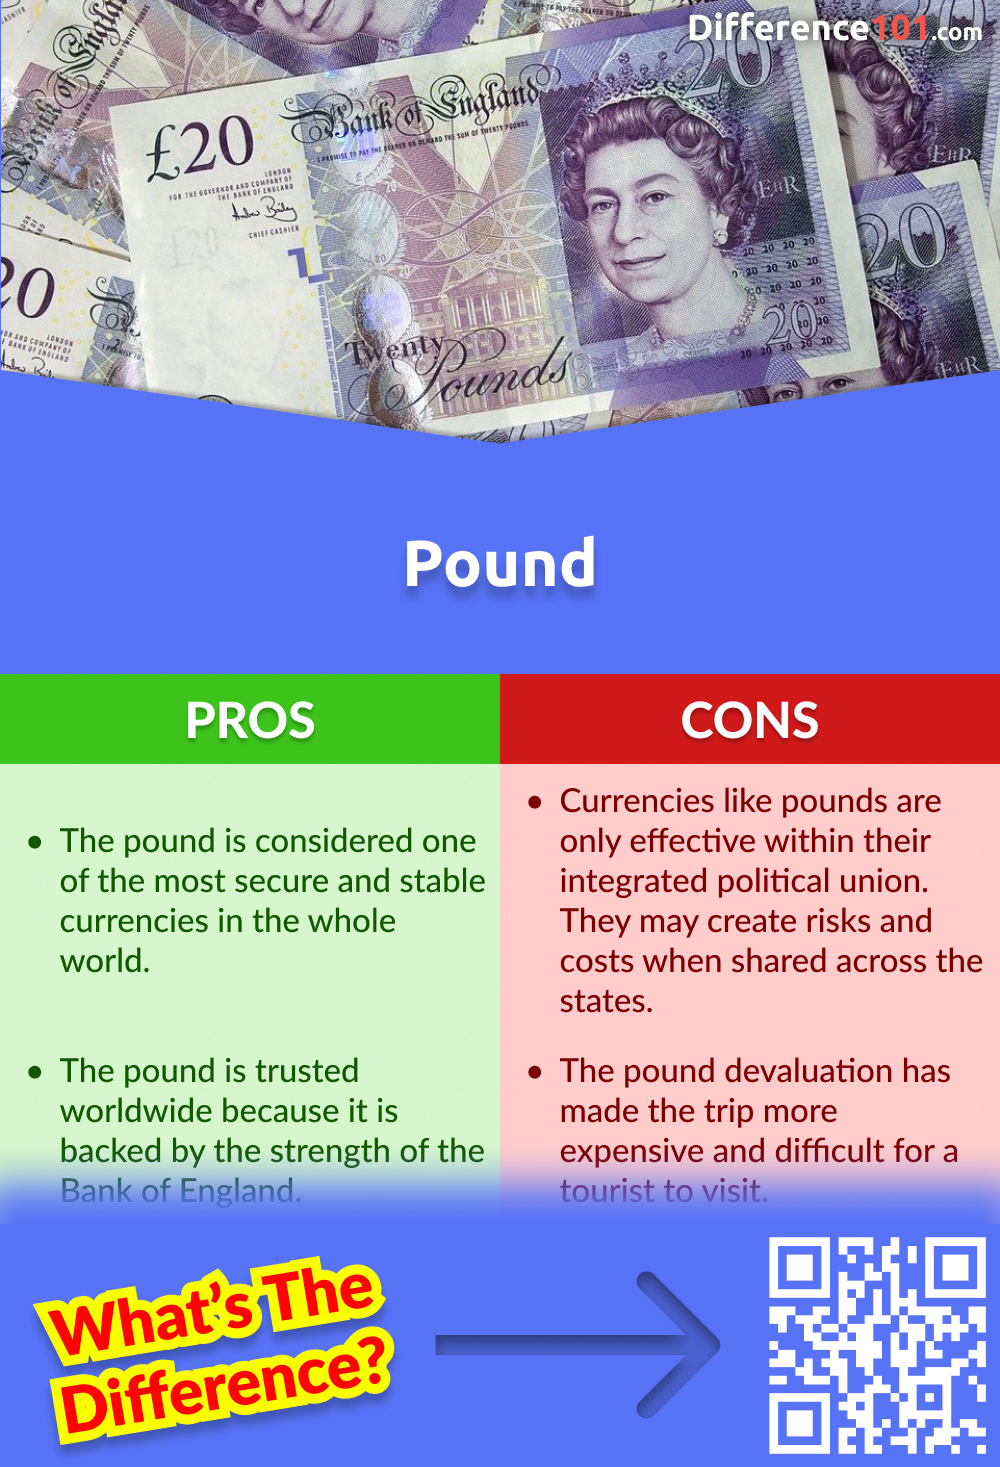 Pound Pros and Cons